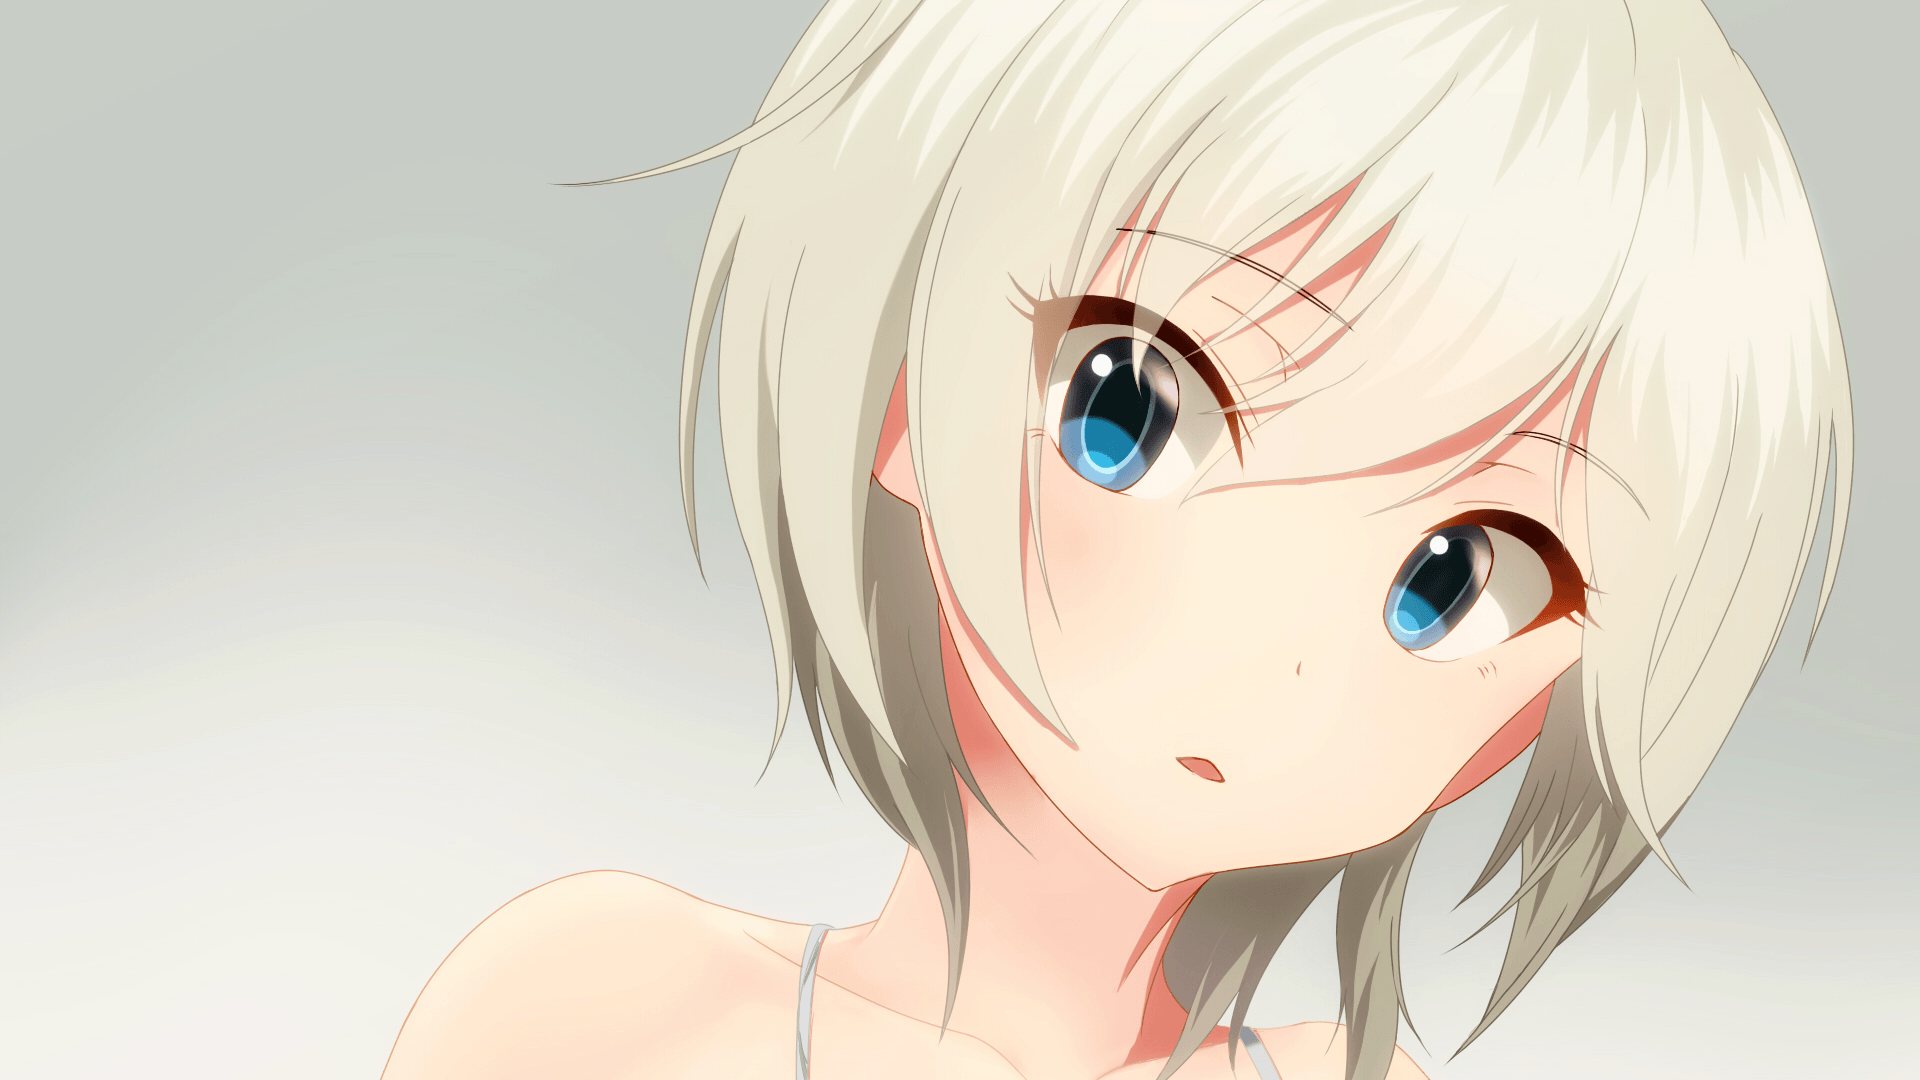 My collection of 1080p Anime Girl Wallpaper